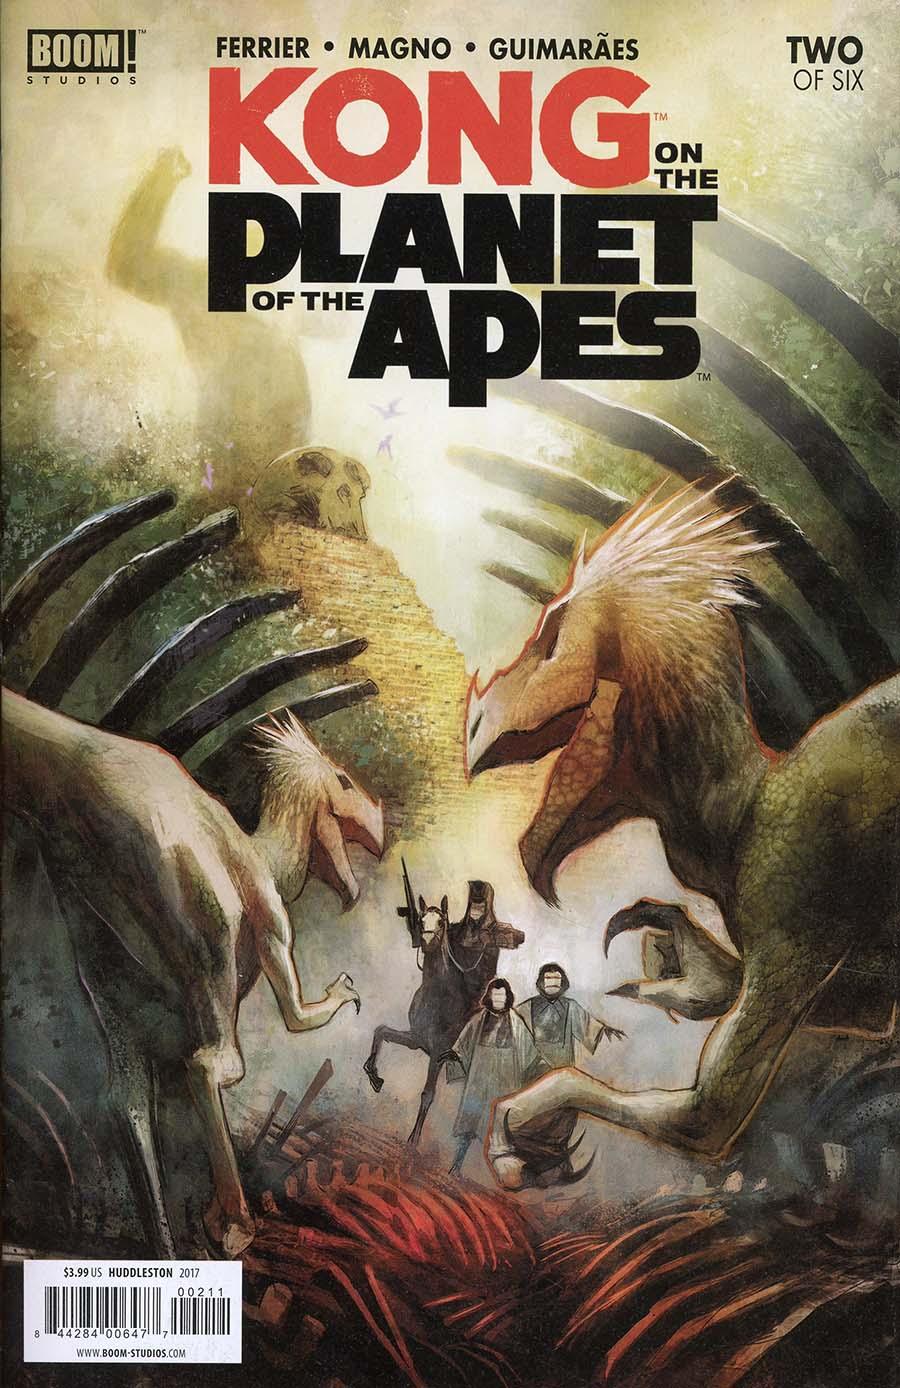 Kong On The Planet Of The Apes Vol. 1 #2